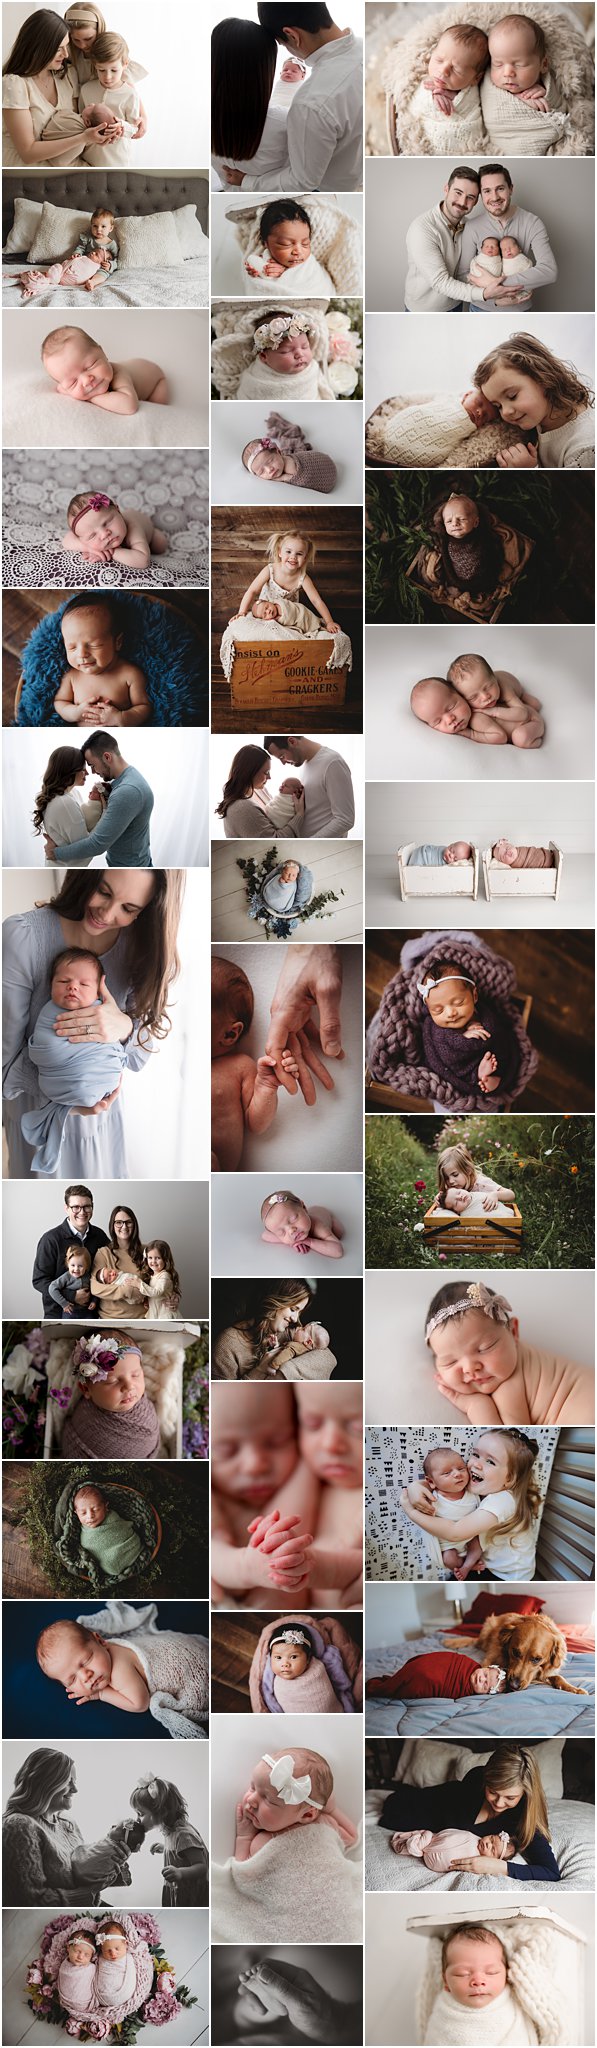 Indianapolis Newborn Photography by KristeenMarie